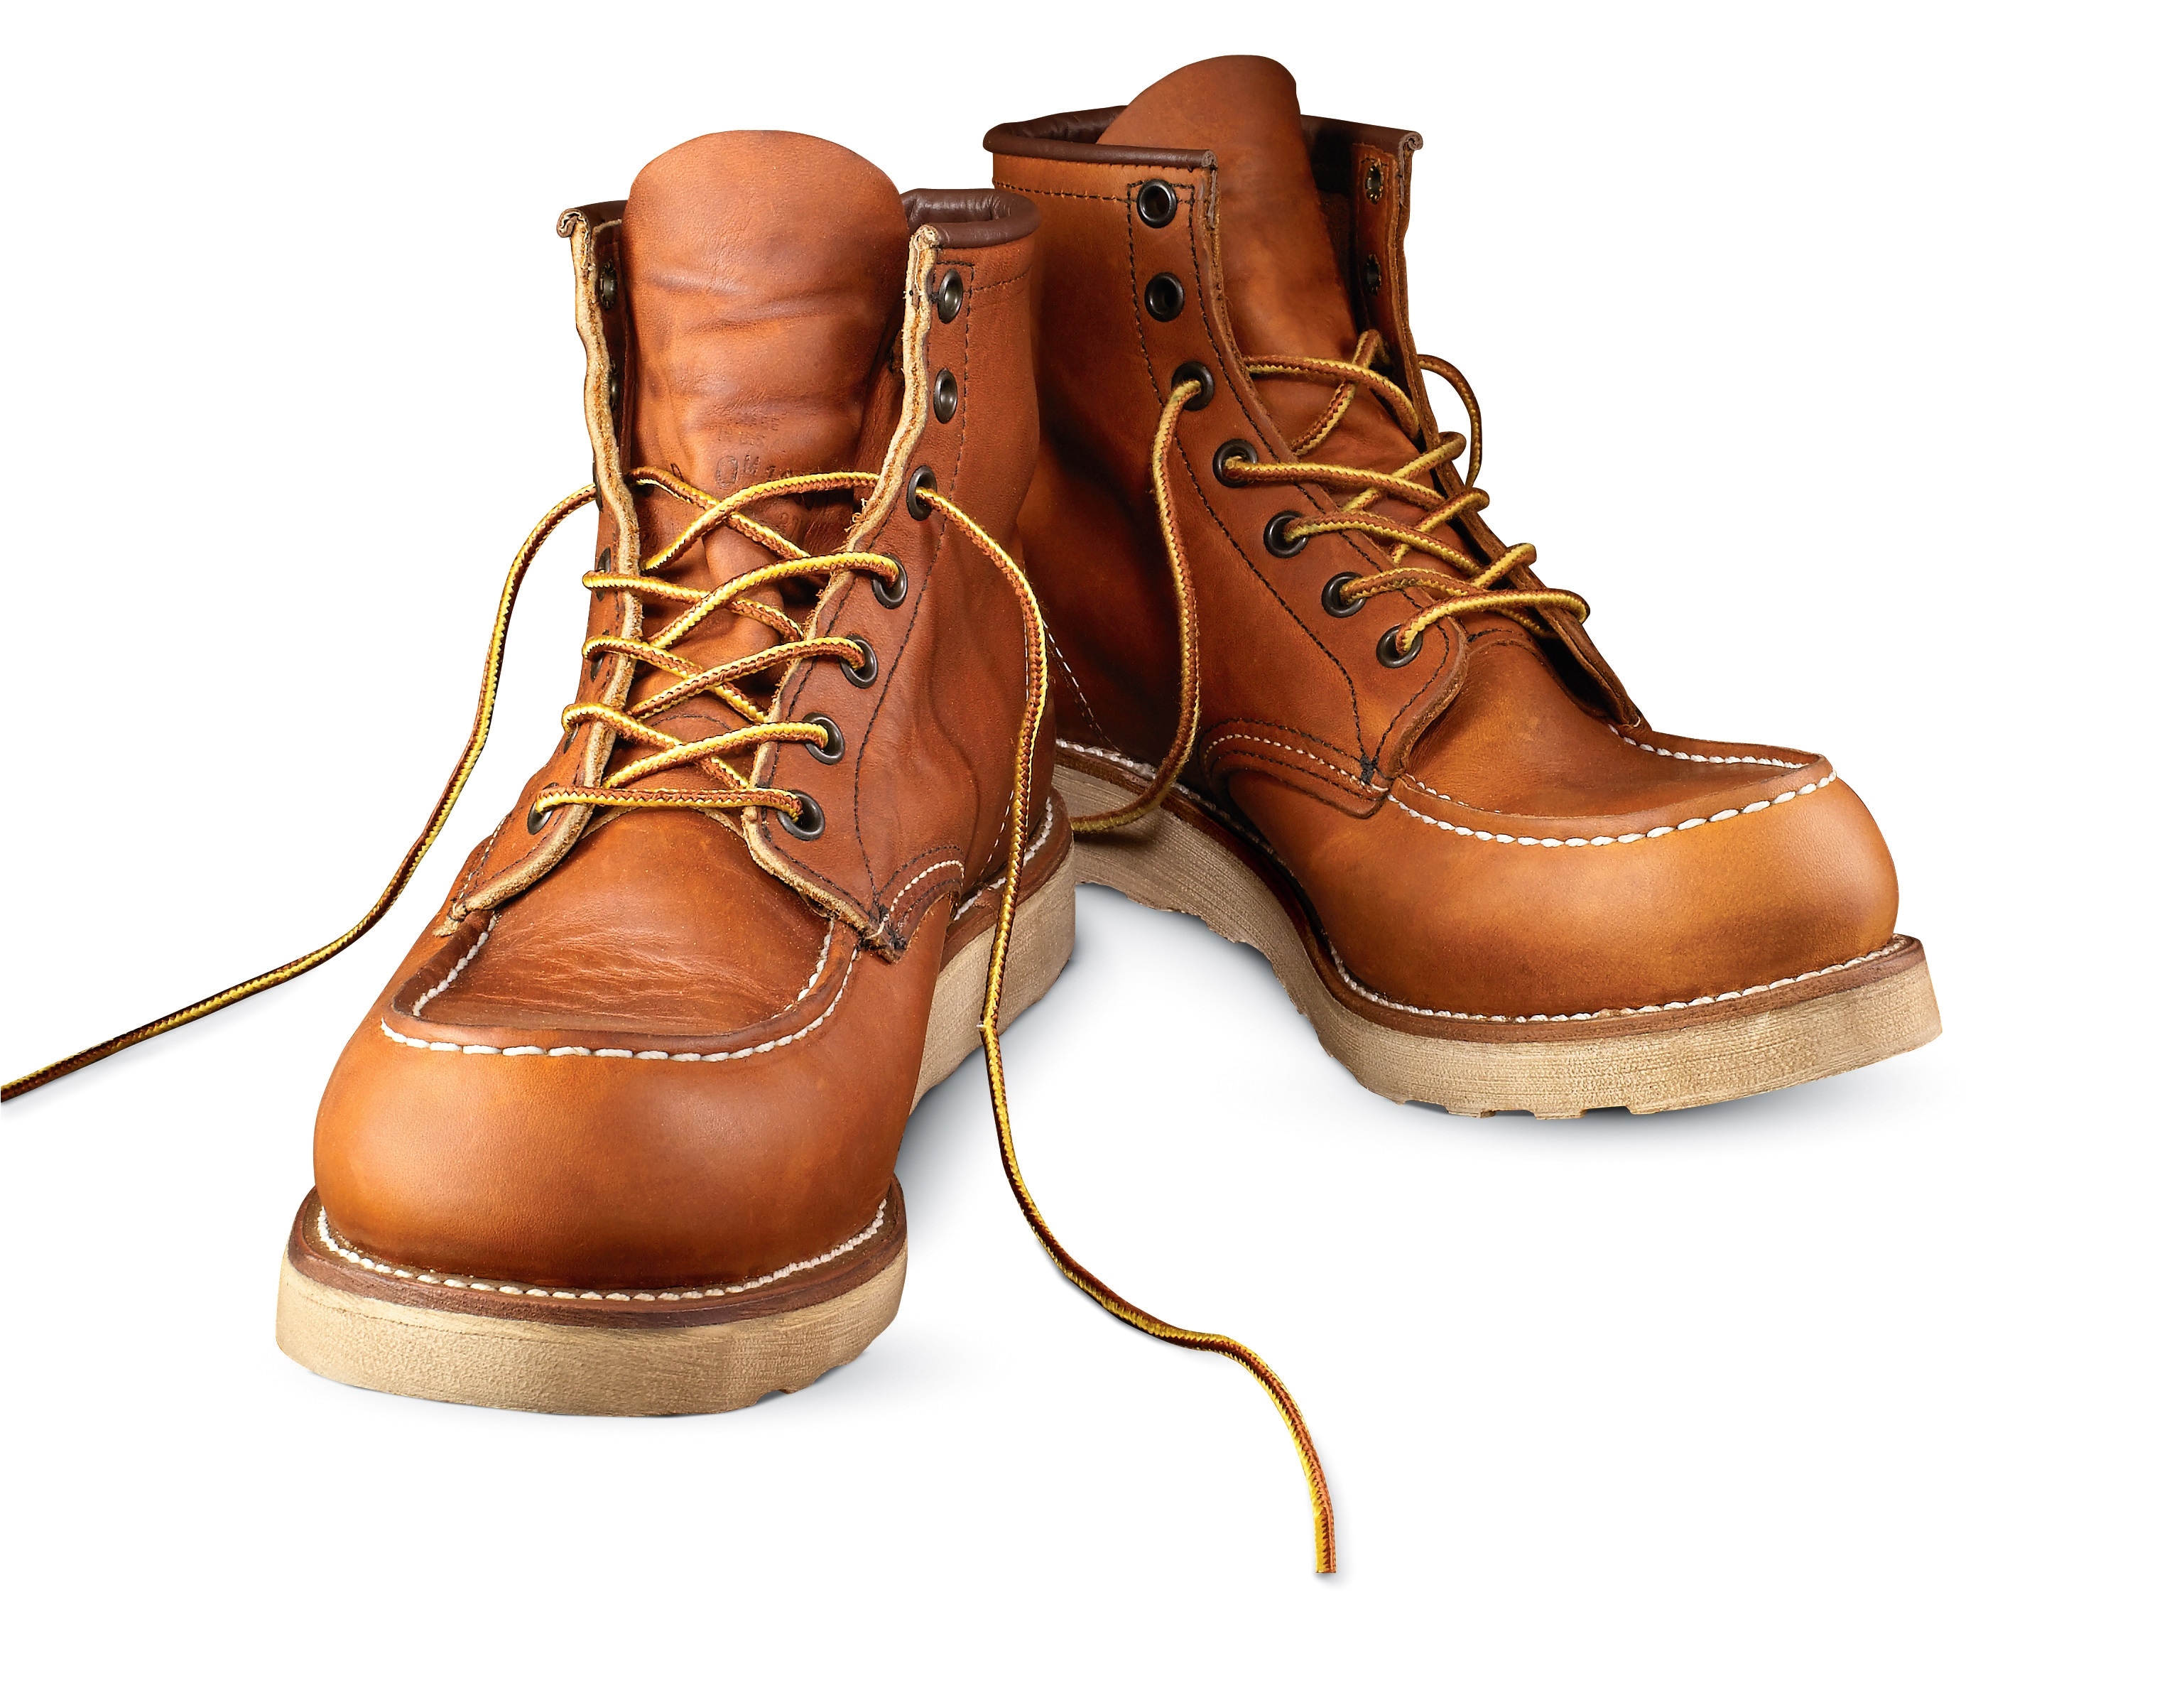 stomp in style work boots for safety comfort and surefootedness builder magazine work wear and gear work boots